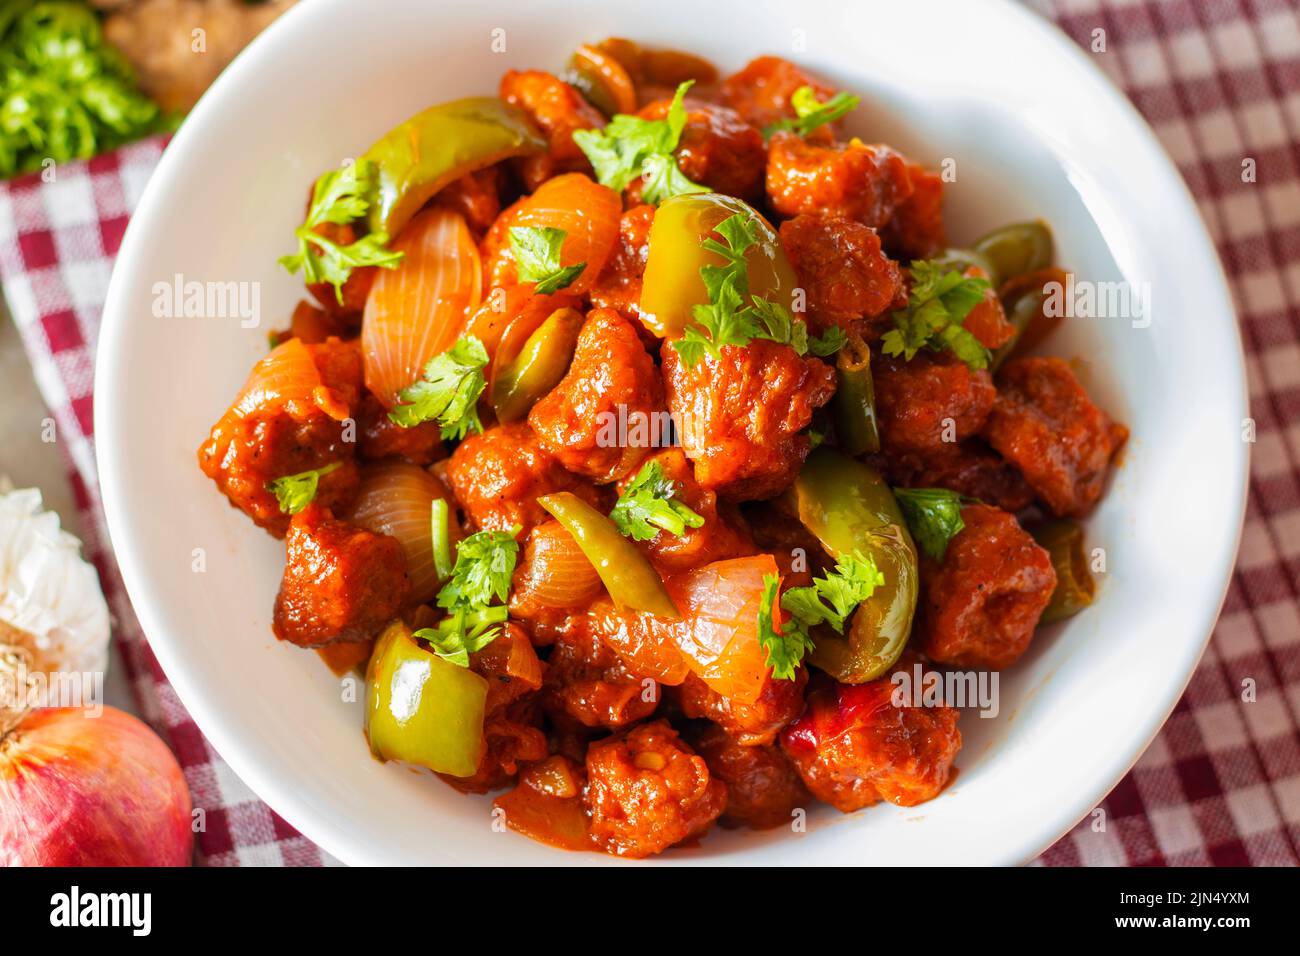 selective focus of Soya Manchurian/Chili Soya bean chunks recipe. with a decorative background. Stock Photo